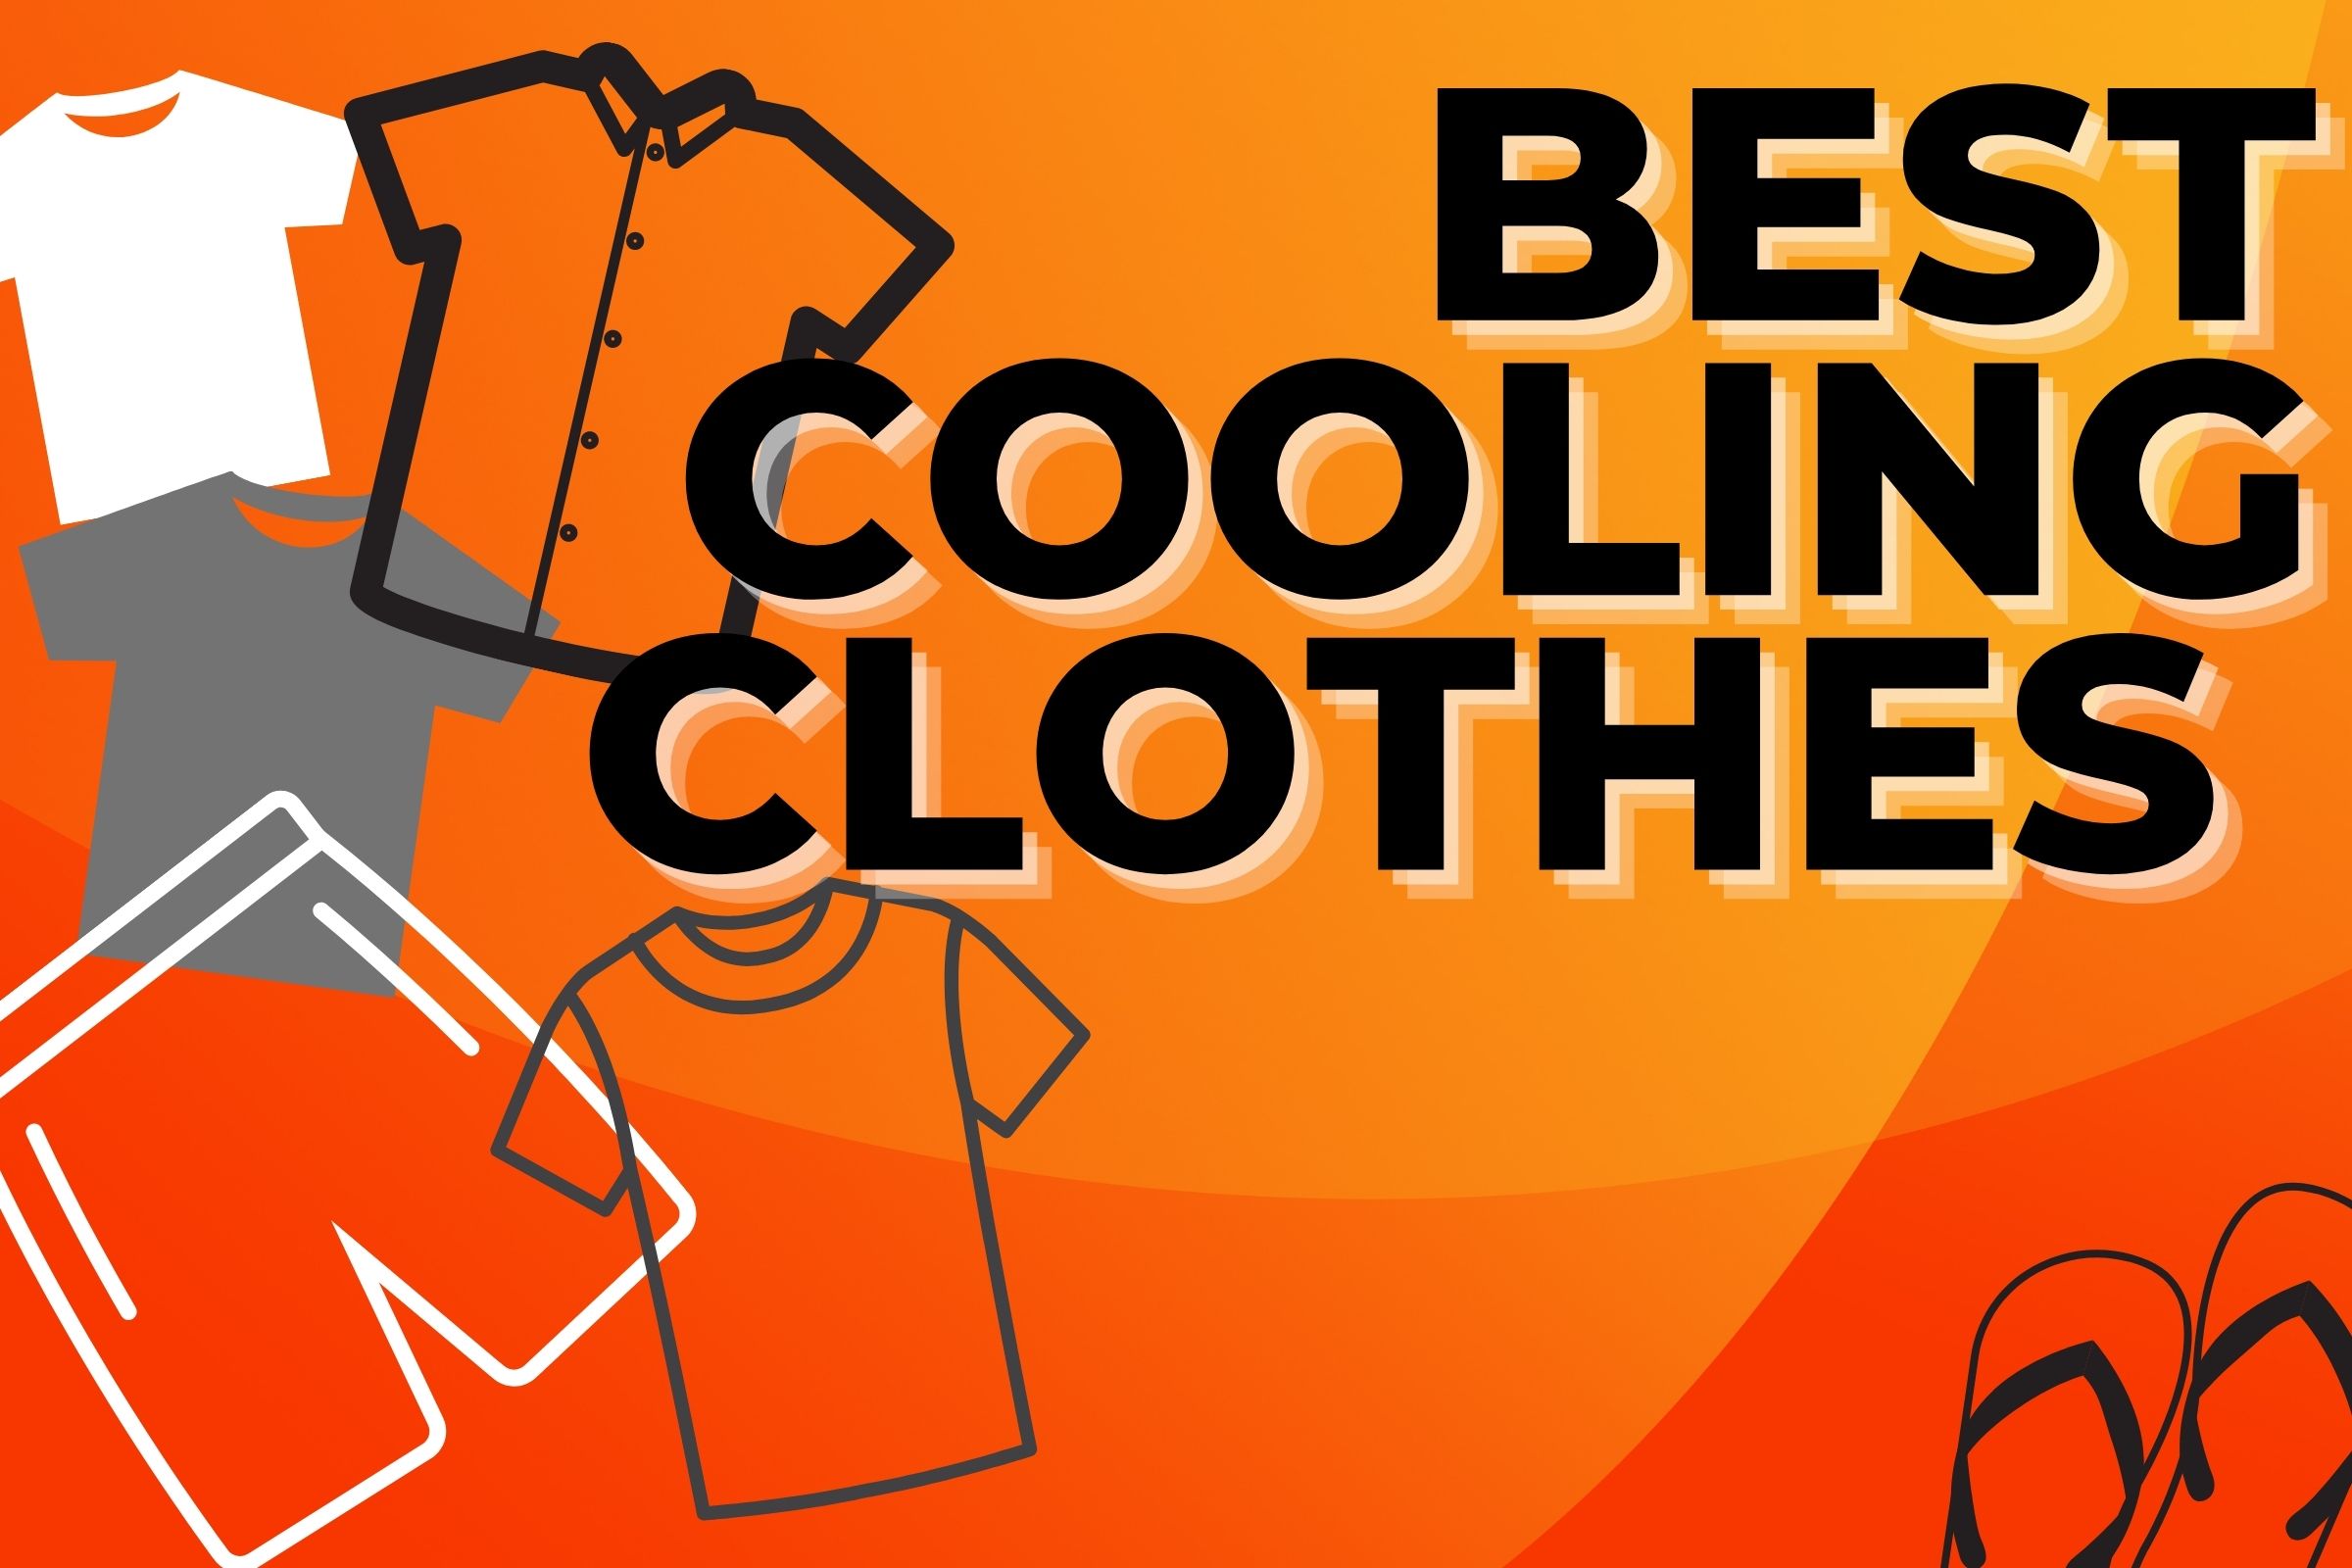 Best Cooling Clothes